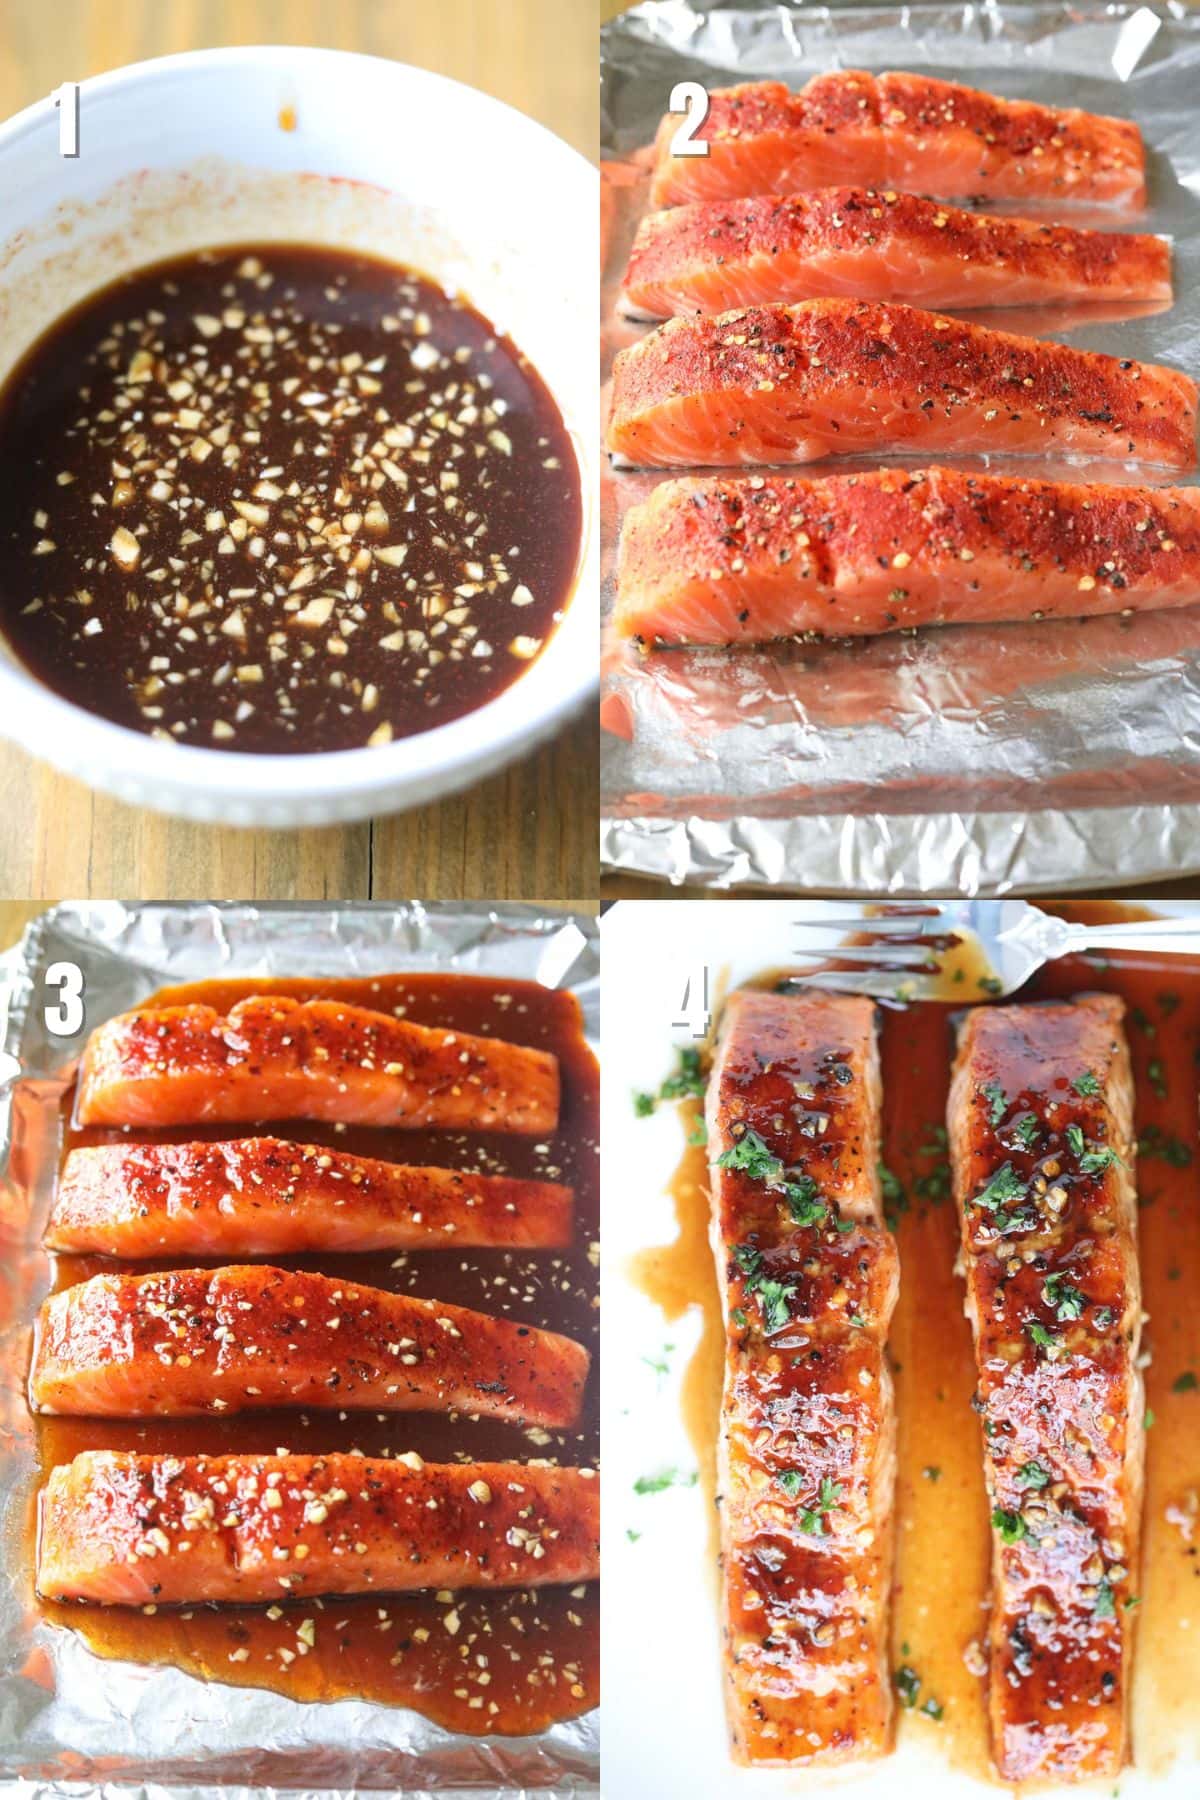 step by step instructions for making maple glazed salmon.